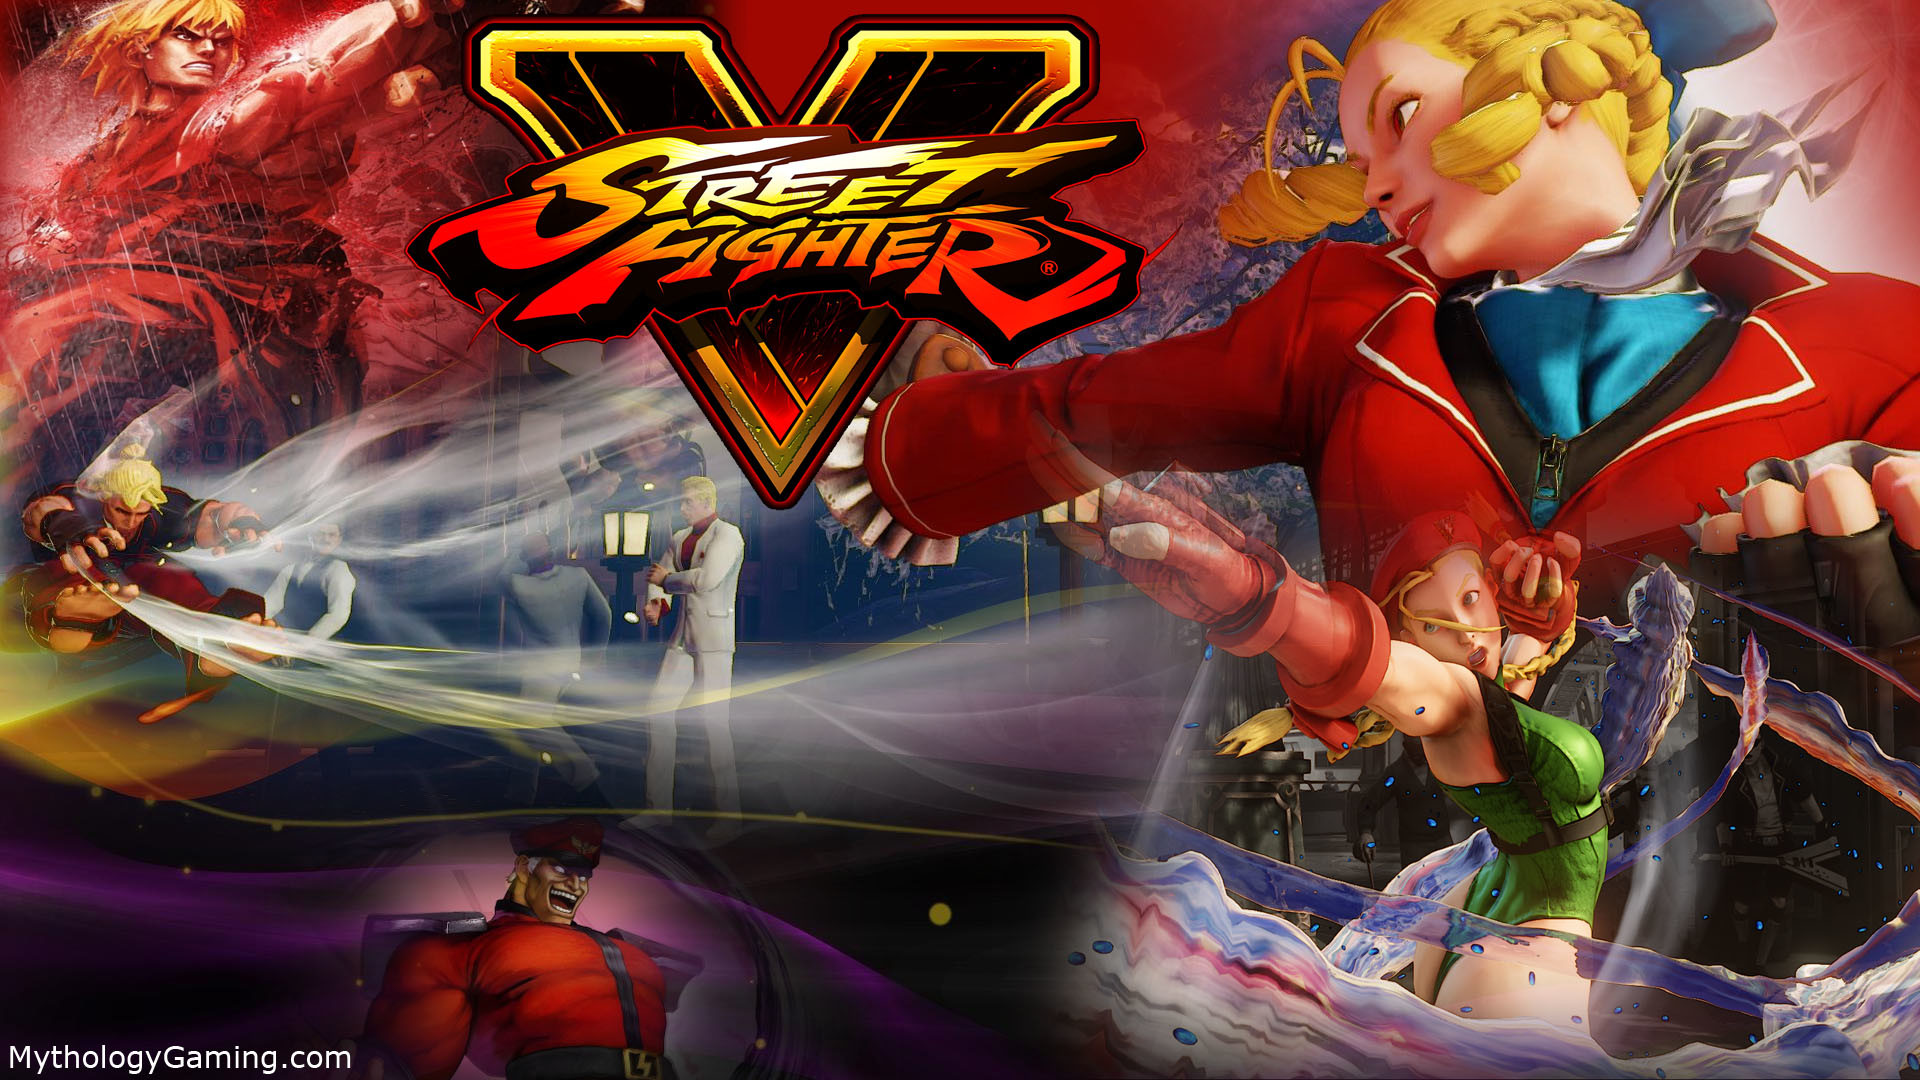 1920x1080 Street Fighter 5 Wallpapers - My Free Wallpapers Hub